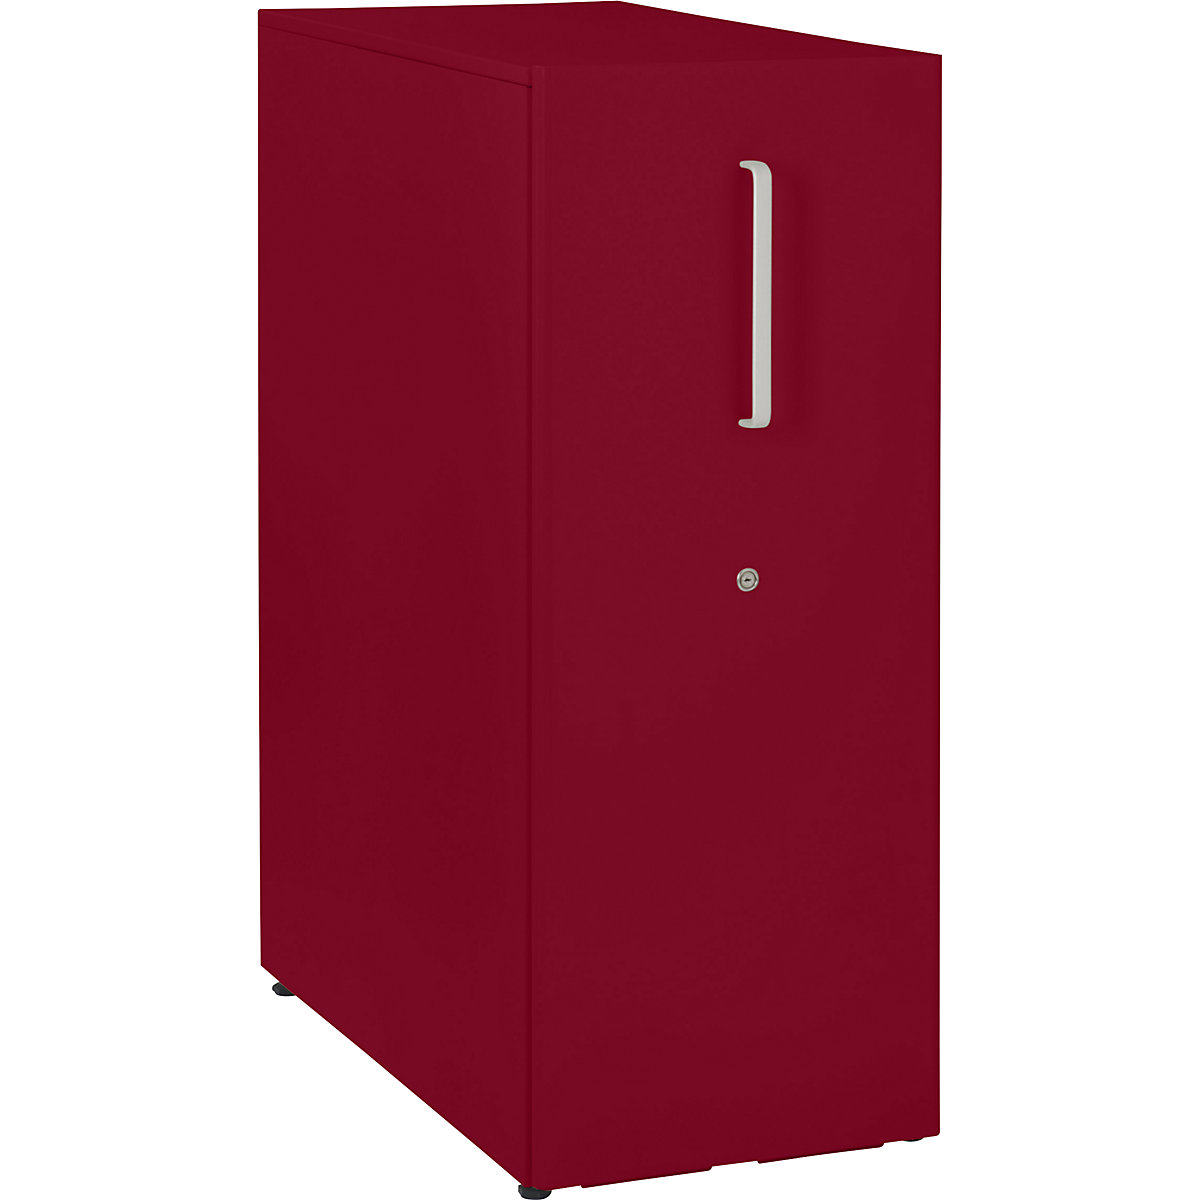 Tower™ 3 add-on furniture, with worktop – BISLEY, for the left side, 3 shelves, cardinal red-13